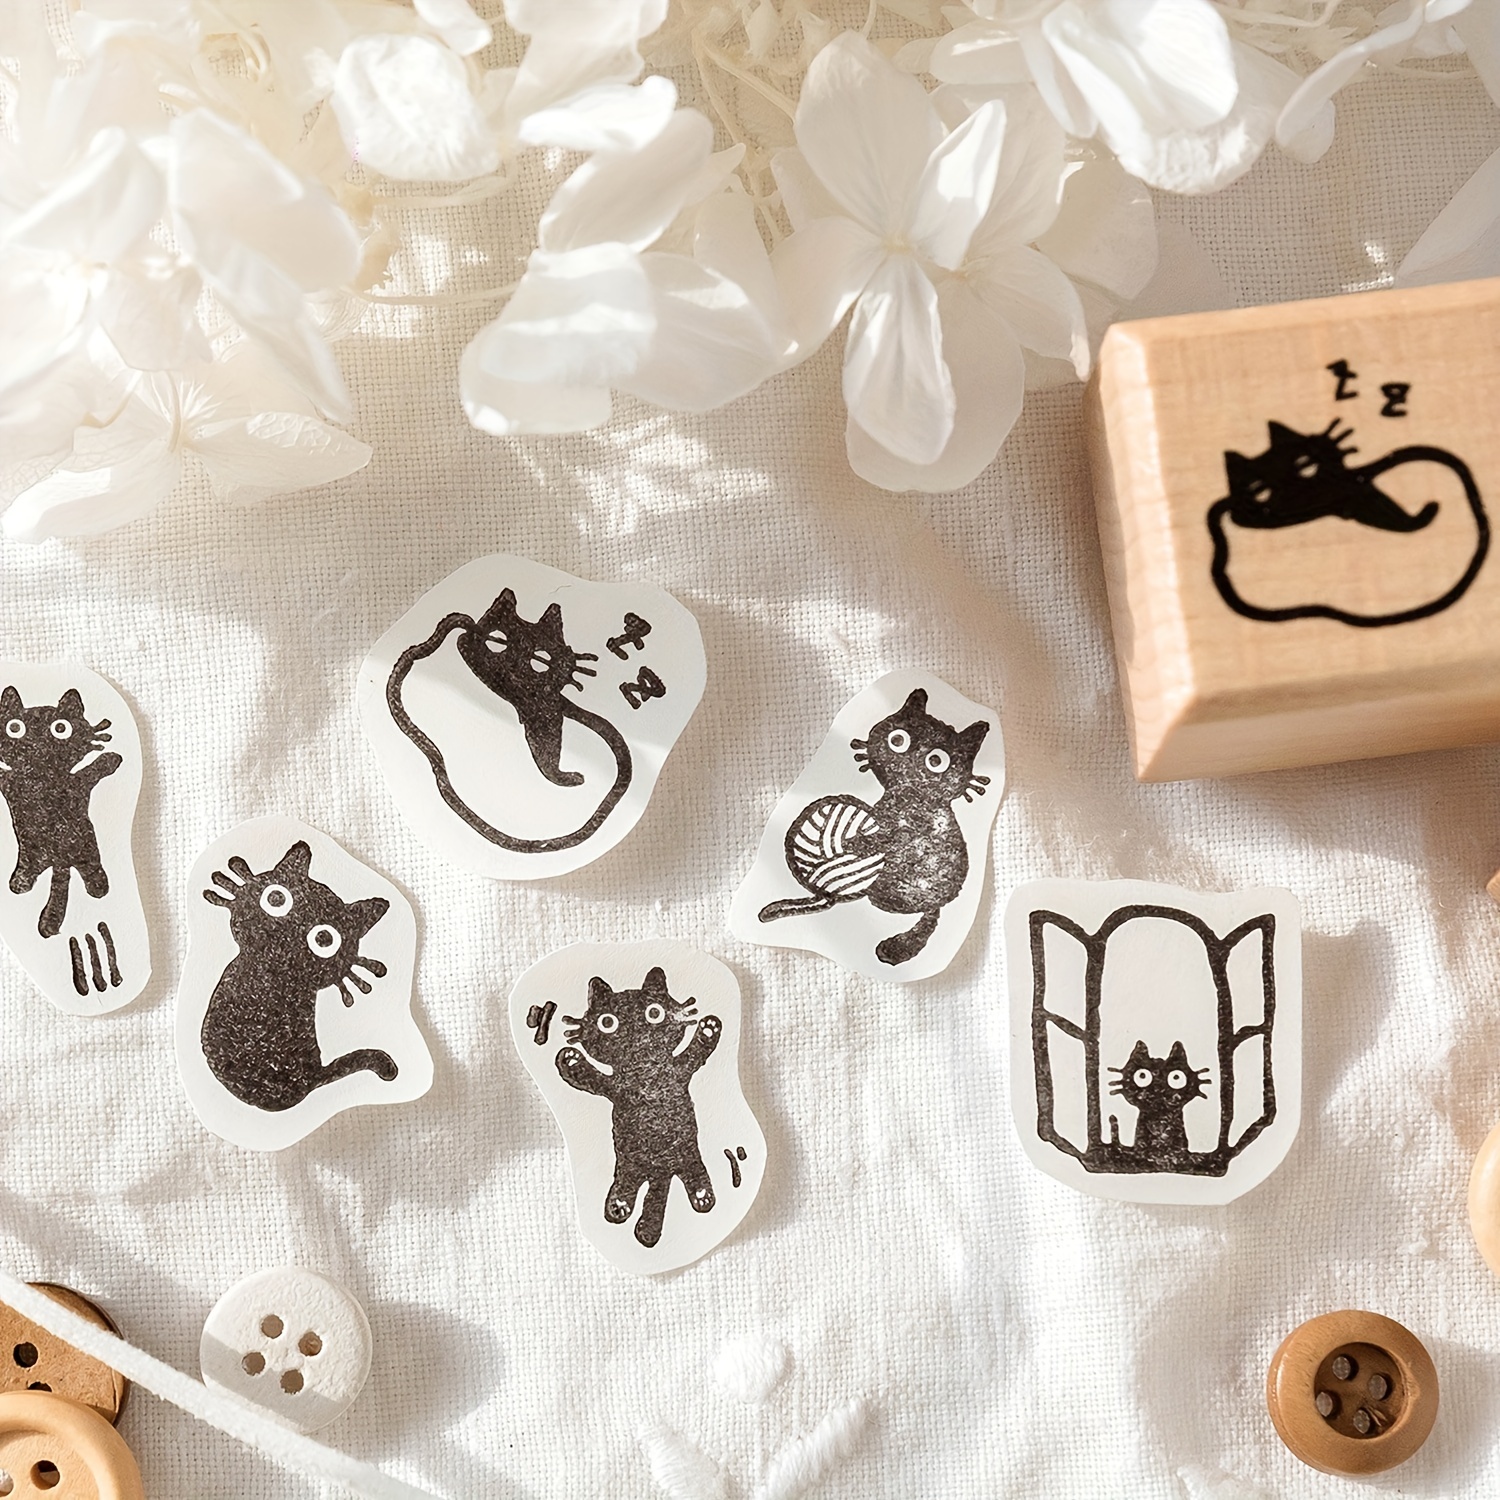 Sleeping Cat Rubber Stamp | Hand Carved Rubber Stamp | Stamping | Cute Cat  Stamp | Scrapbooking Stamp | Cat Print | Handmade Rubber Stamp